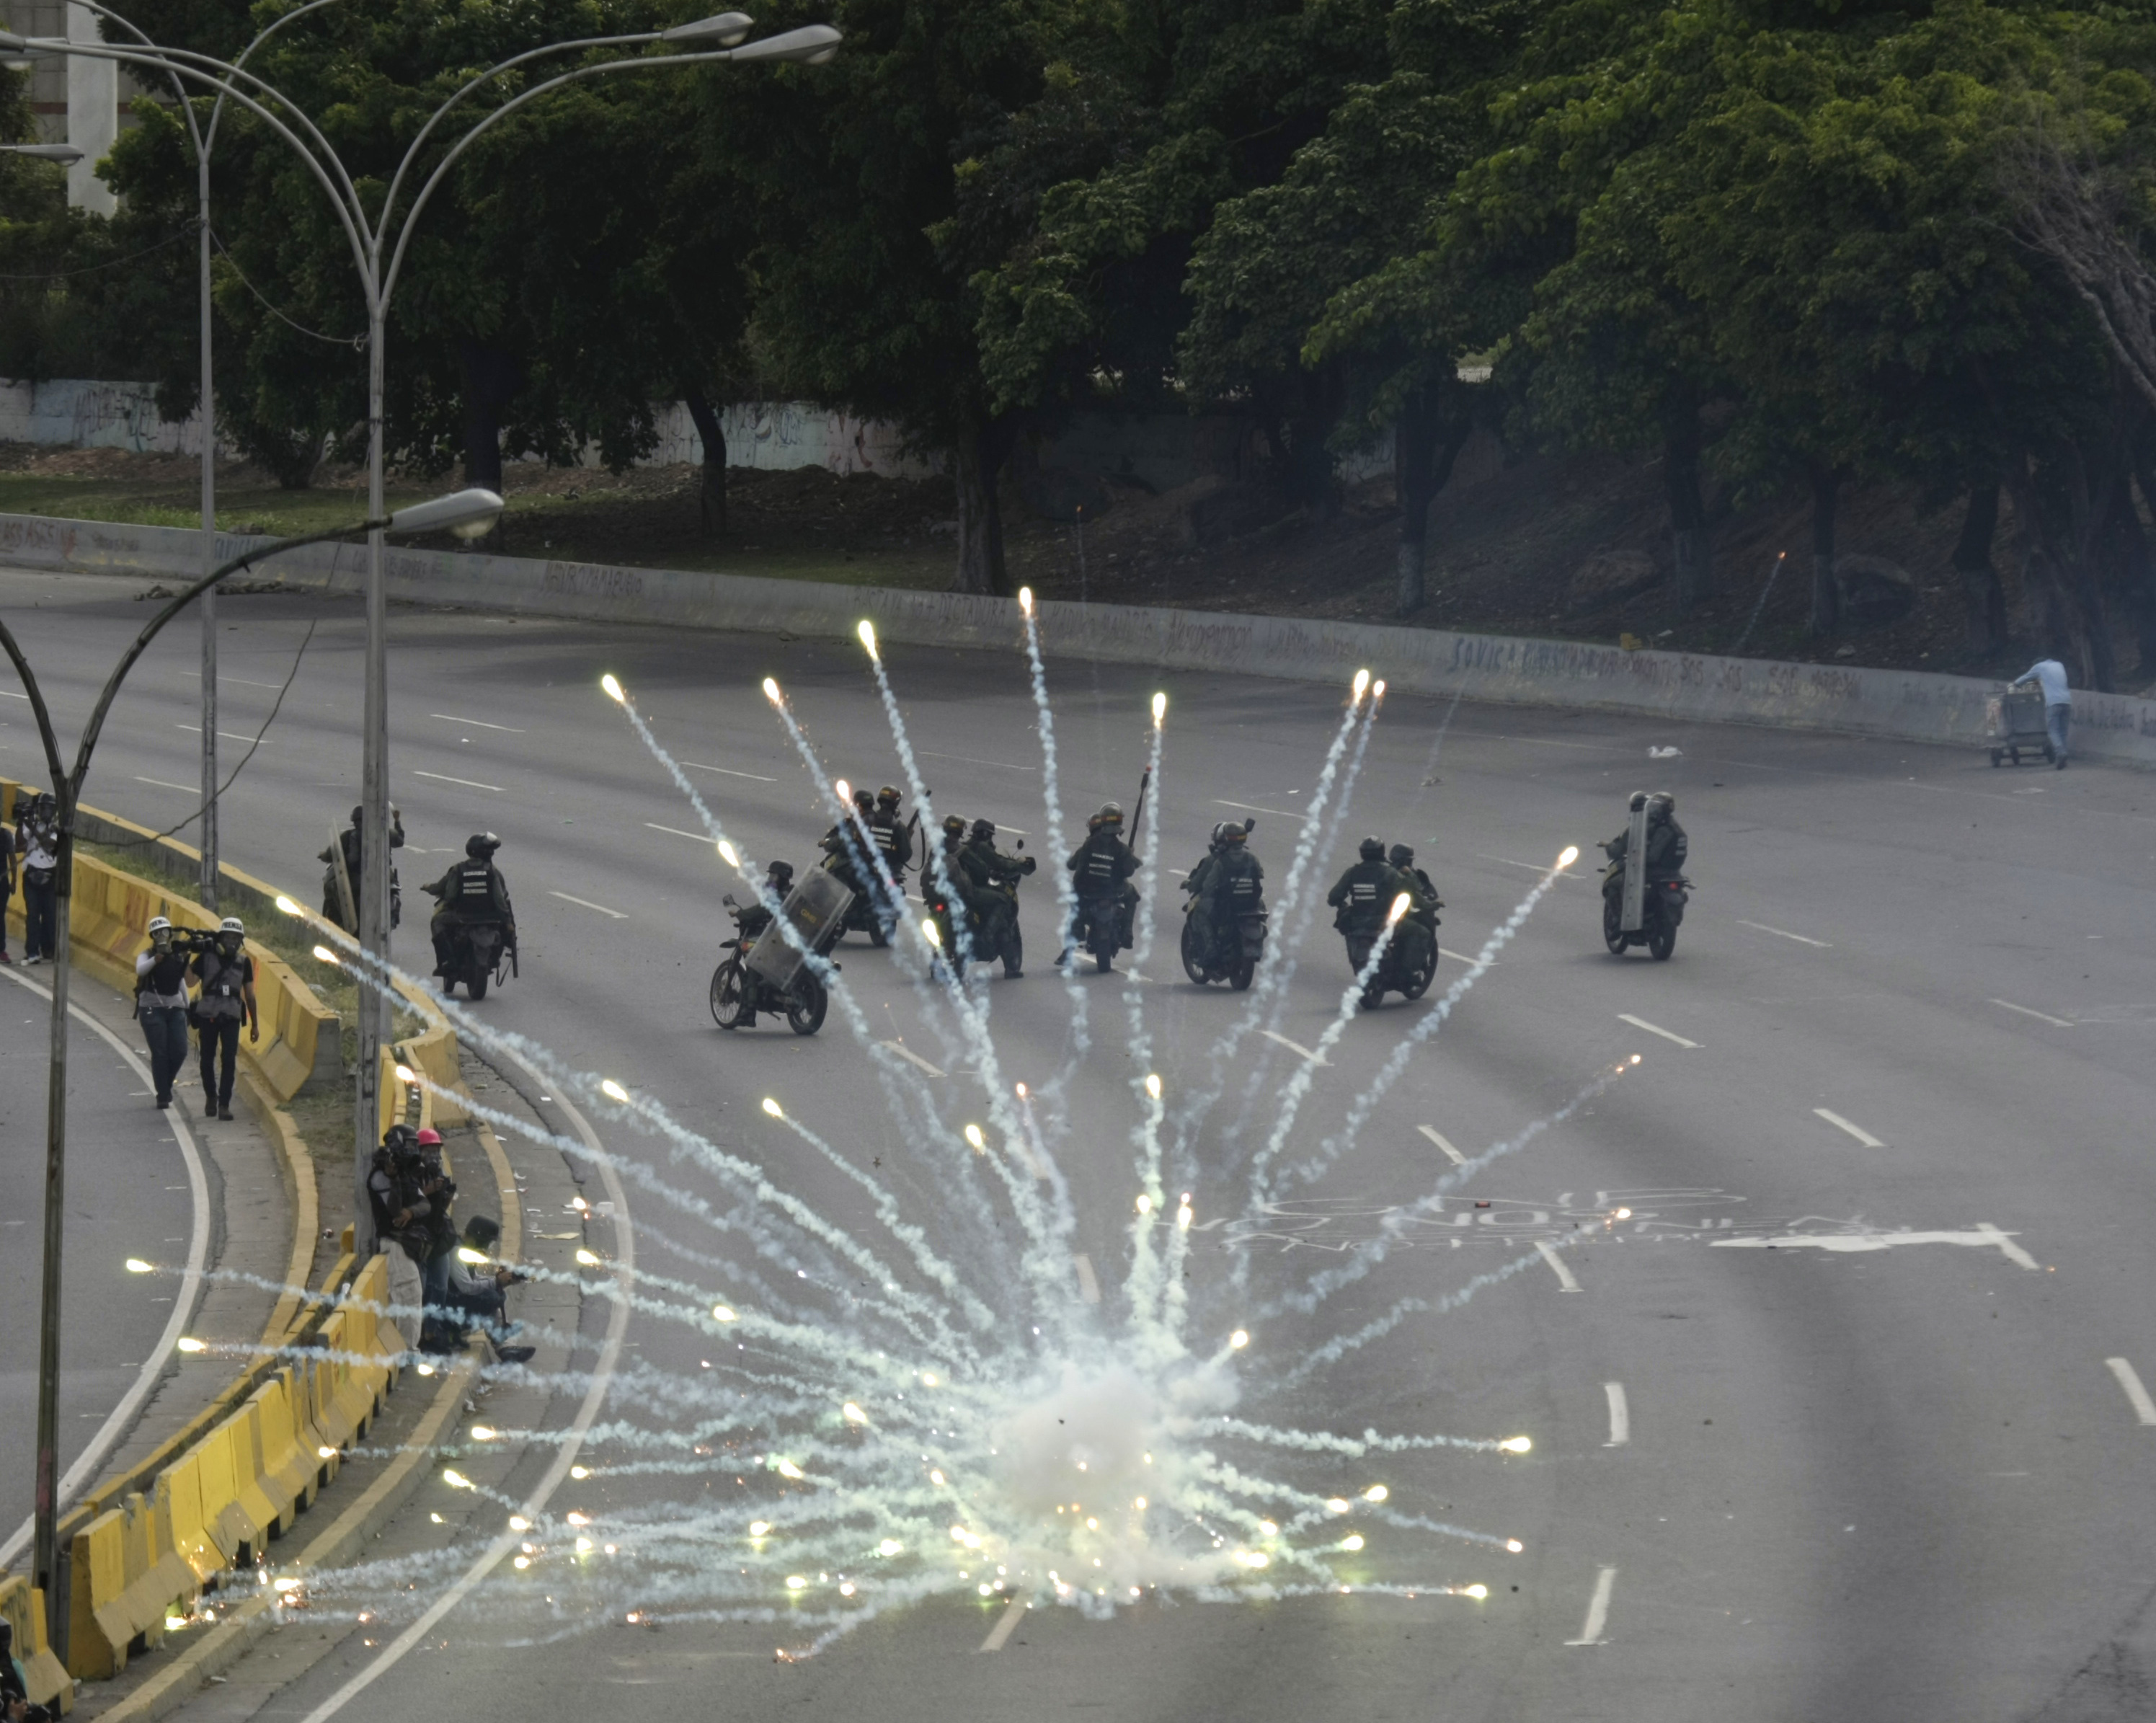 Fireworks launched by anti-government demonstrators explode next to government forces during clashes in Caracas, Venezuela, Wednesday, May 31, 2017. Protests have left dozens dead in the last two months as the opposition protests for immediate presidential elections and the liberation of political prisoners. (AP Photo/Fernando Llano)